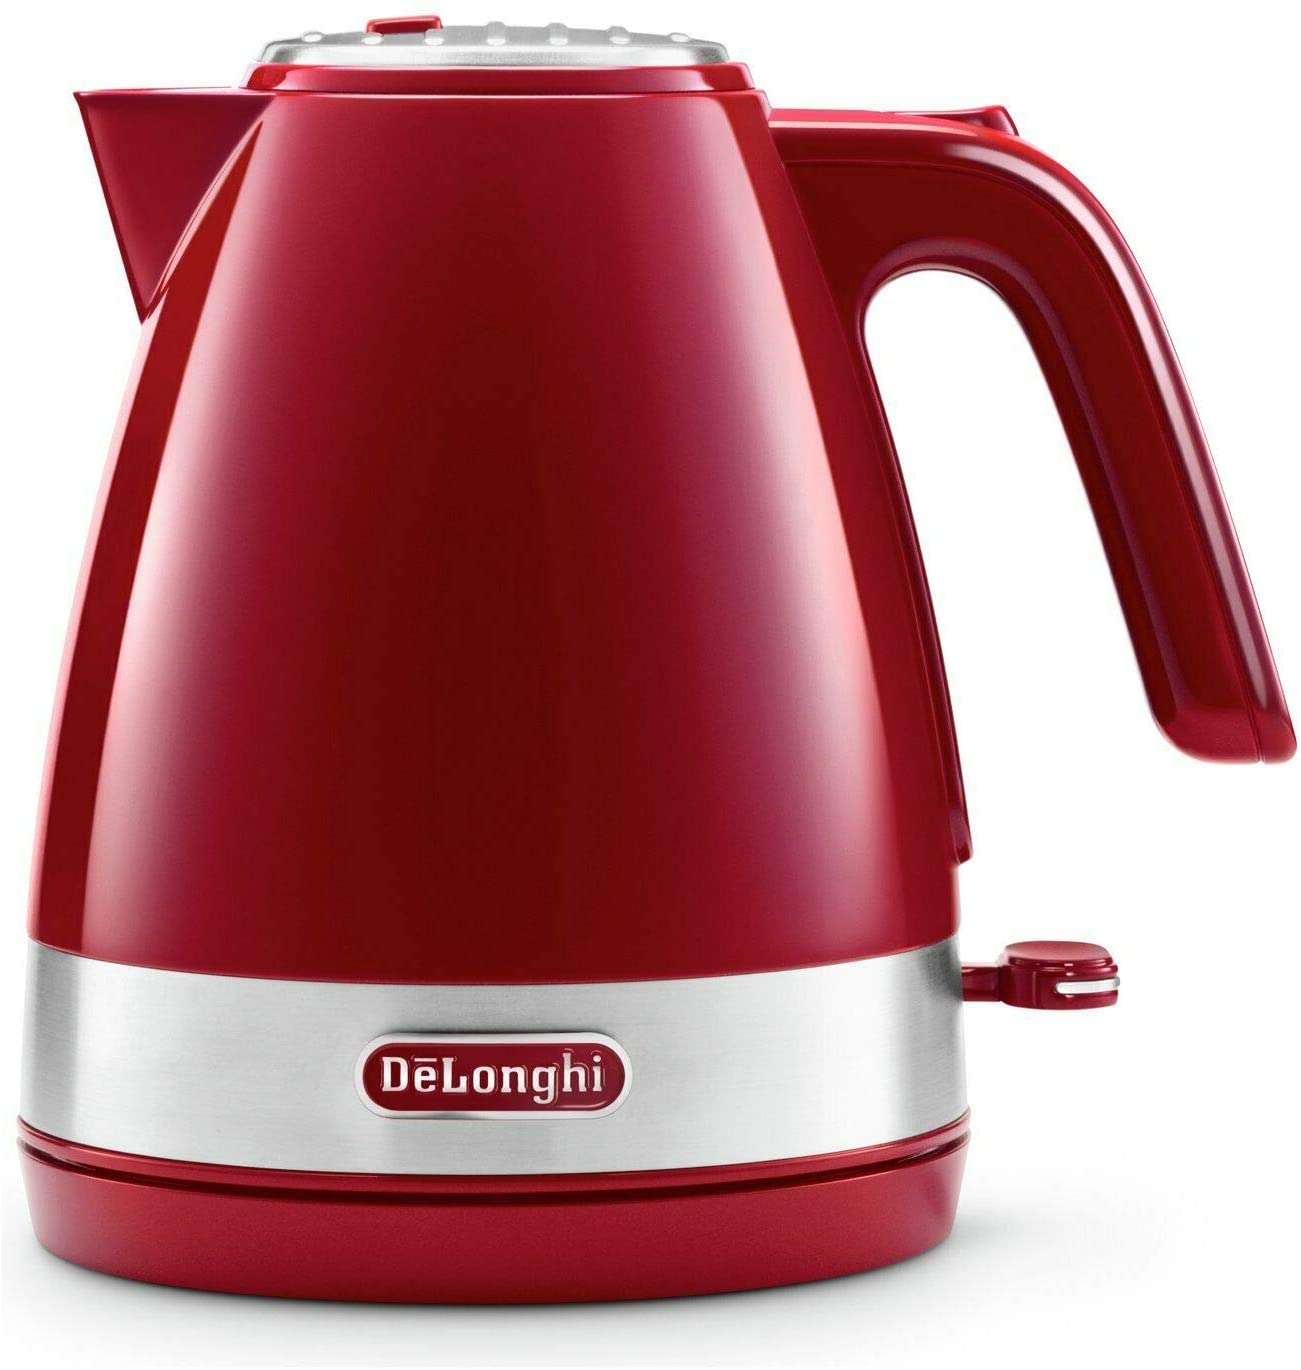 DeLonghi De\'Longhi KBLA 2000.R Electric Kettle 1 Litre Capacity Plastic Base and Stainless Steel Cover Red